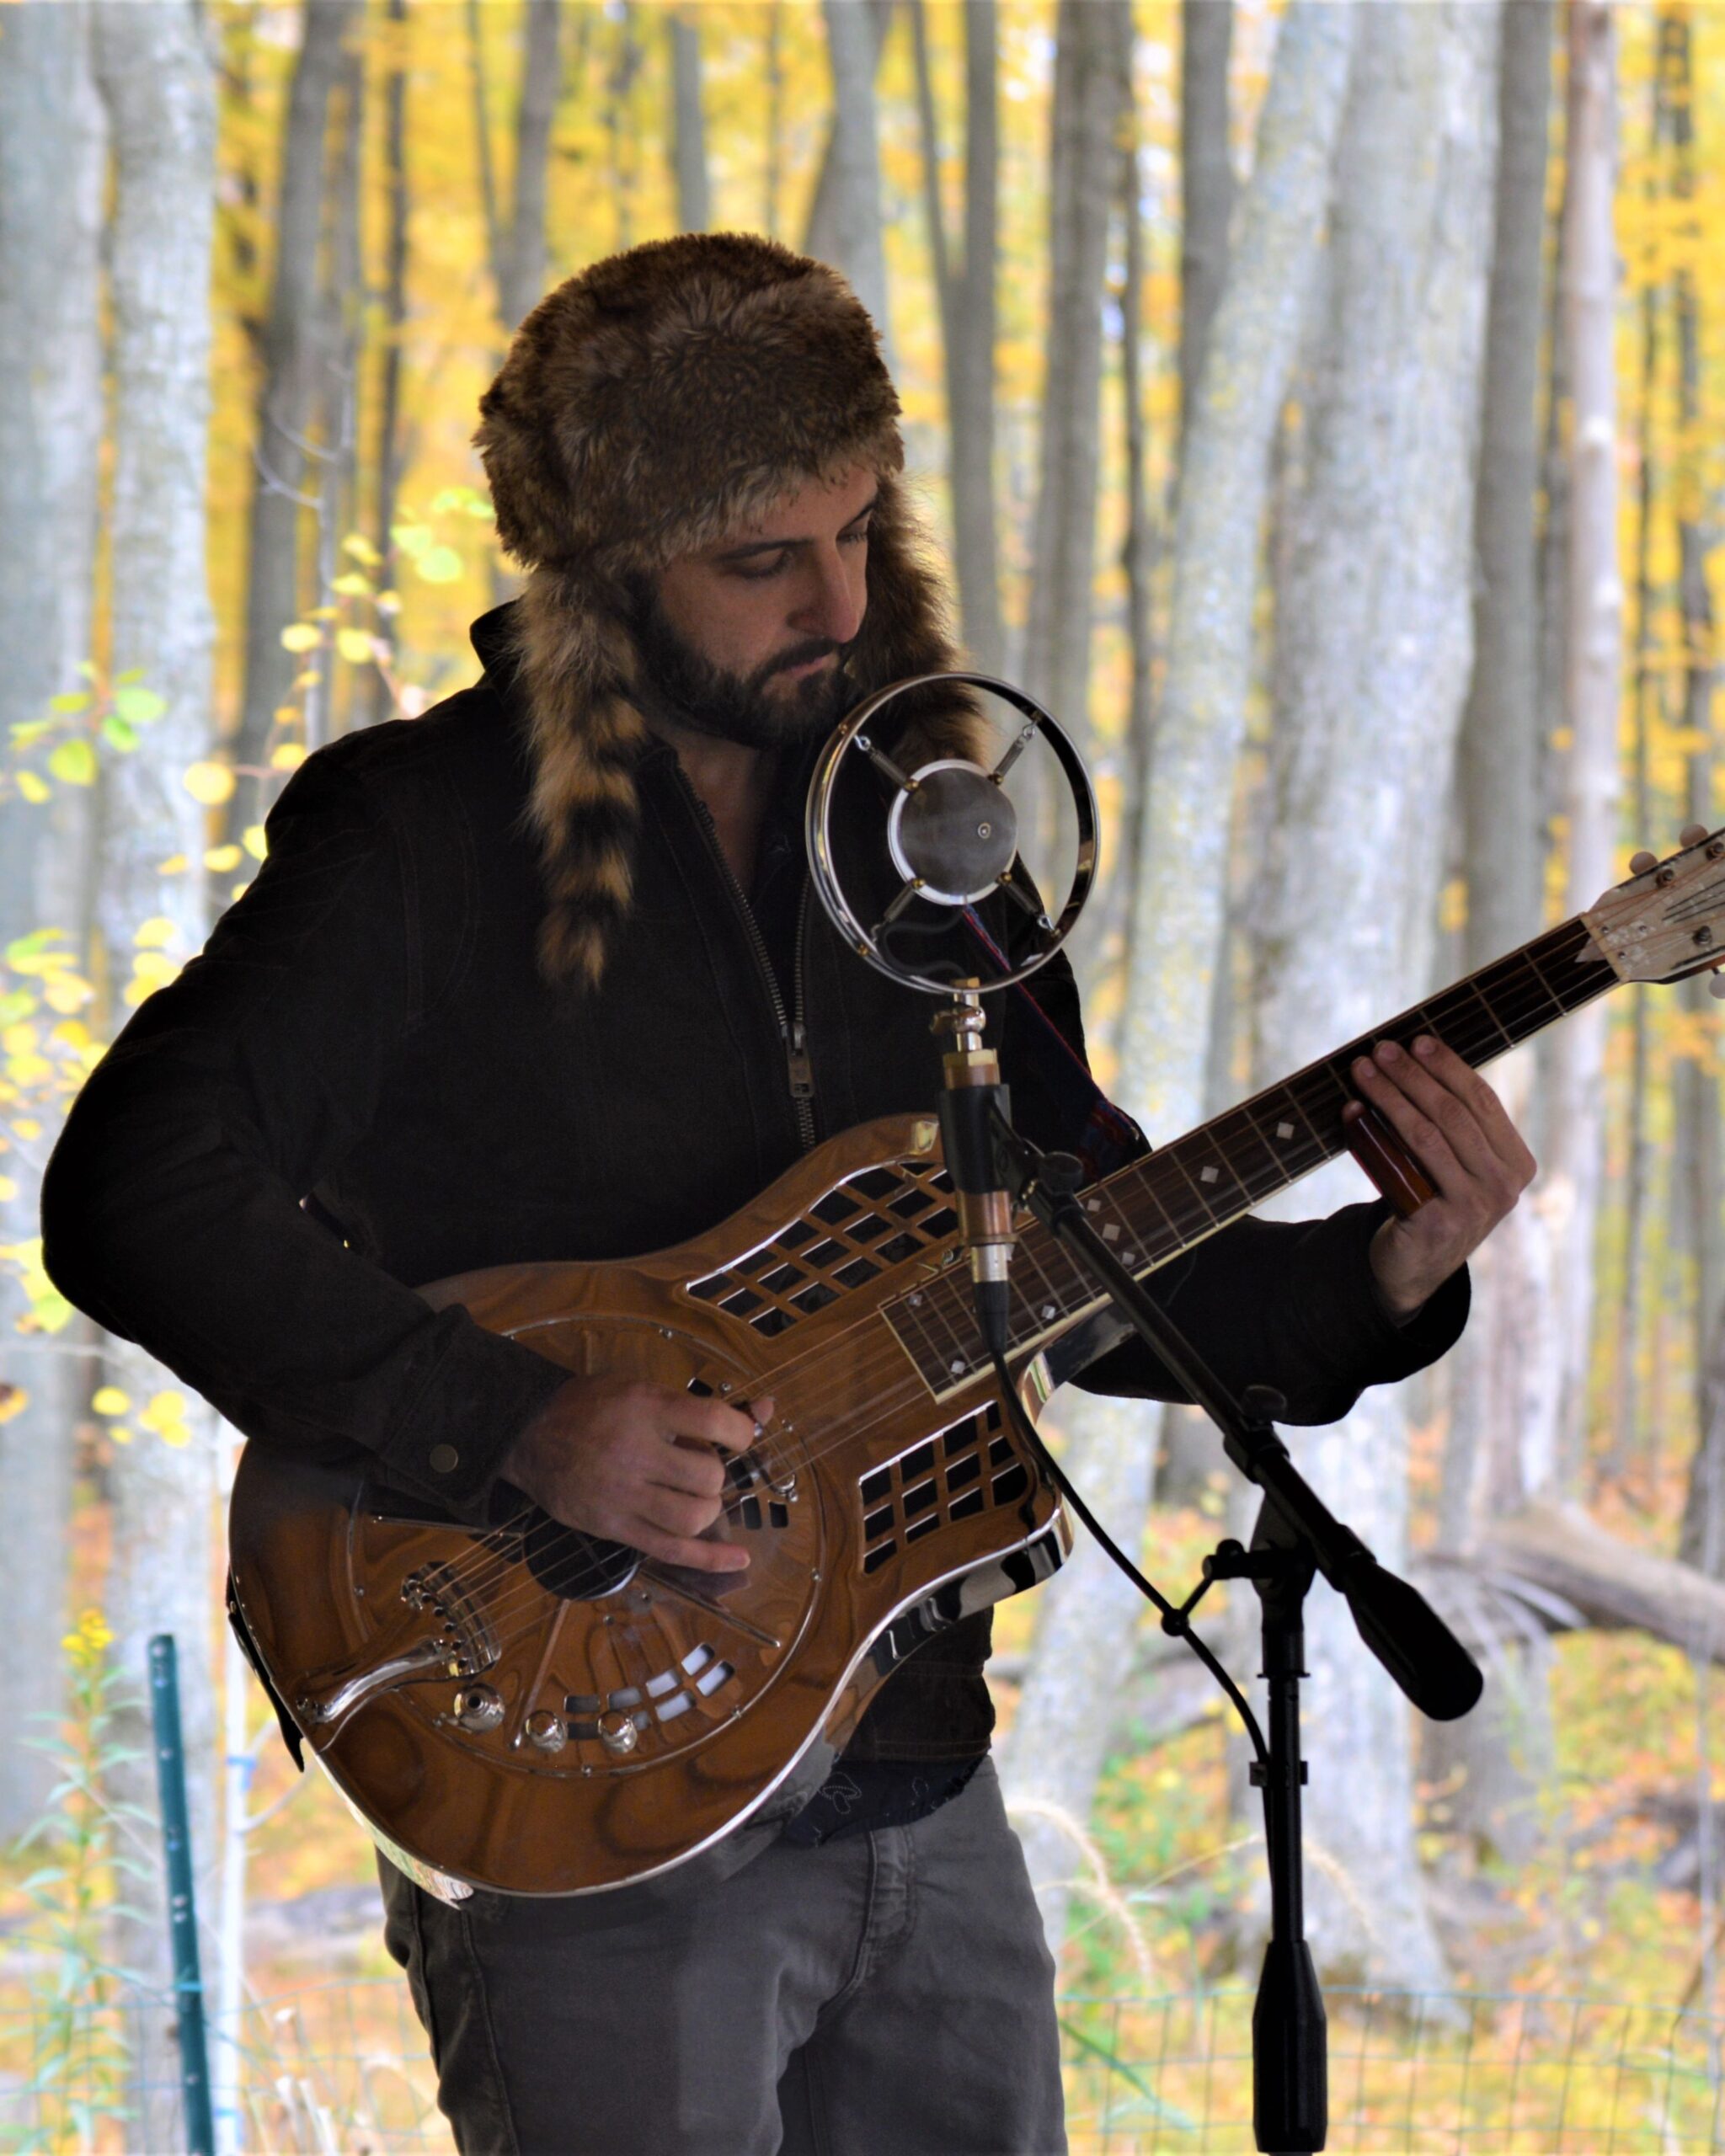 Luke Cerny, a young white man, stands in the autumn woods at Riveredge playing his guitar while singing into a microphone